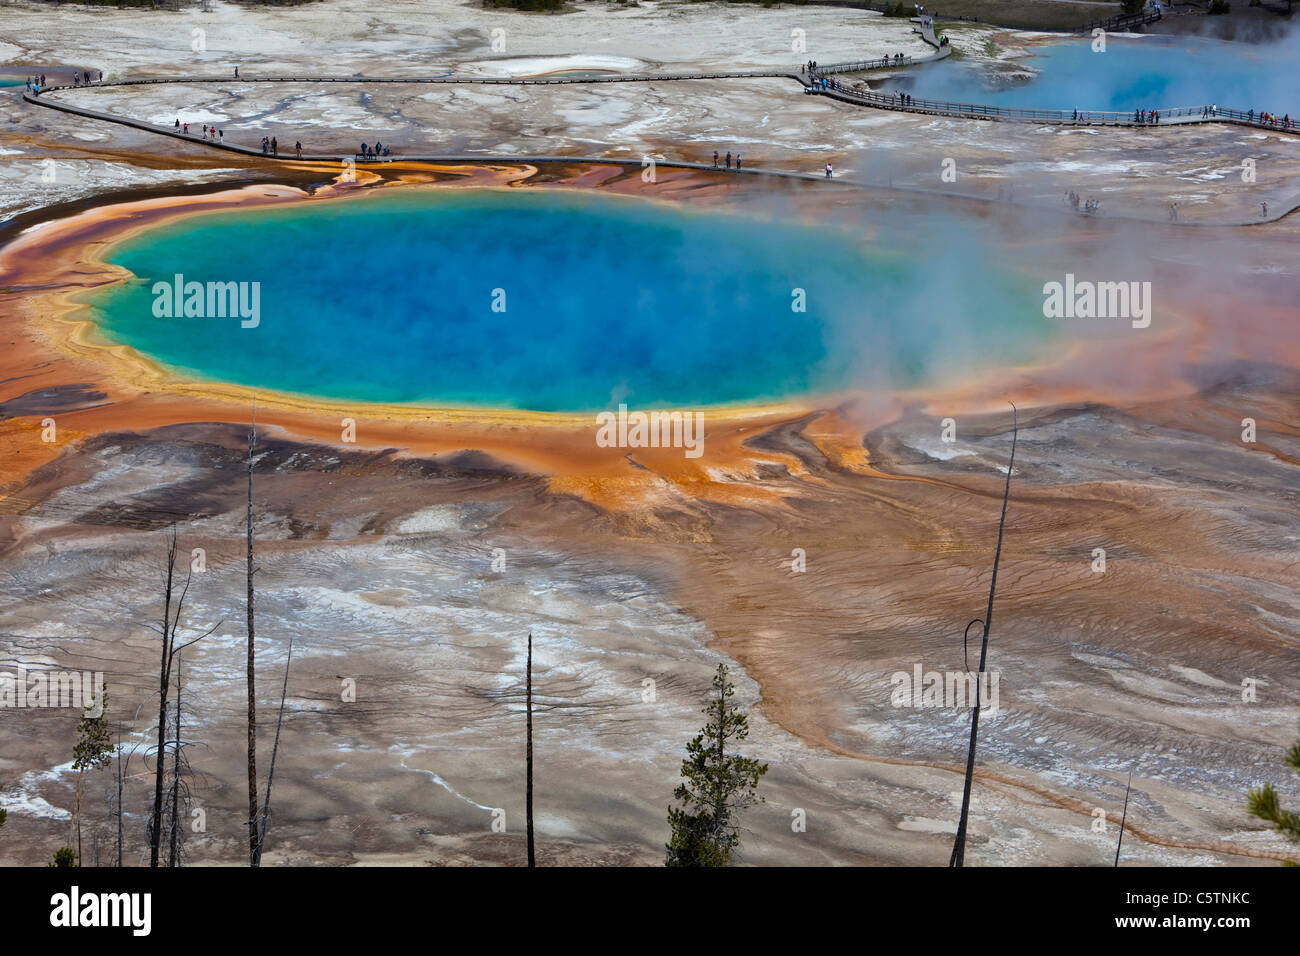 USA, Wyoming, Yellowstone National Park, Grand Prismatic Spring, elevated view Banque D'Images